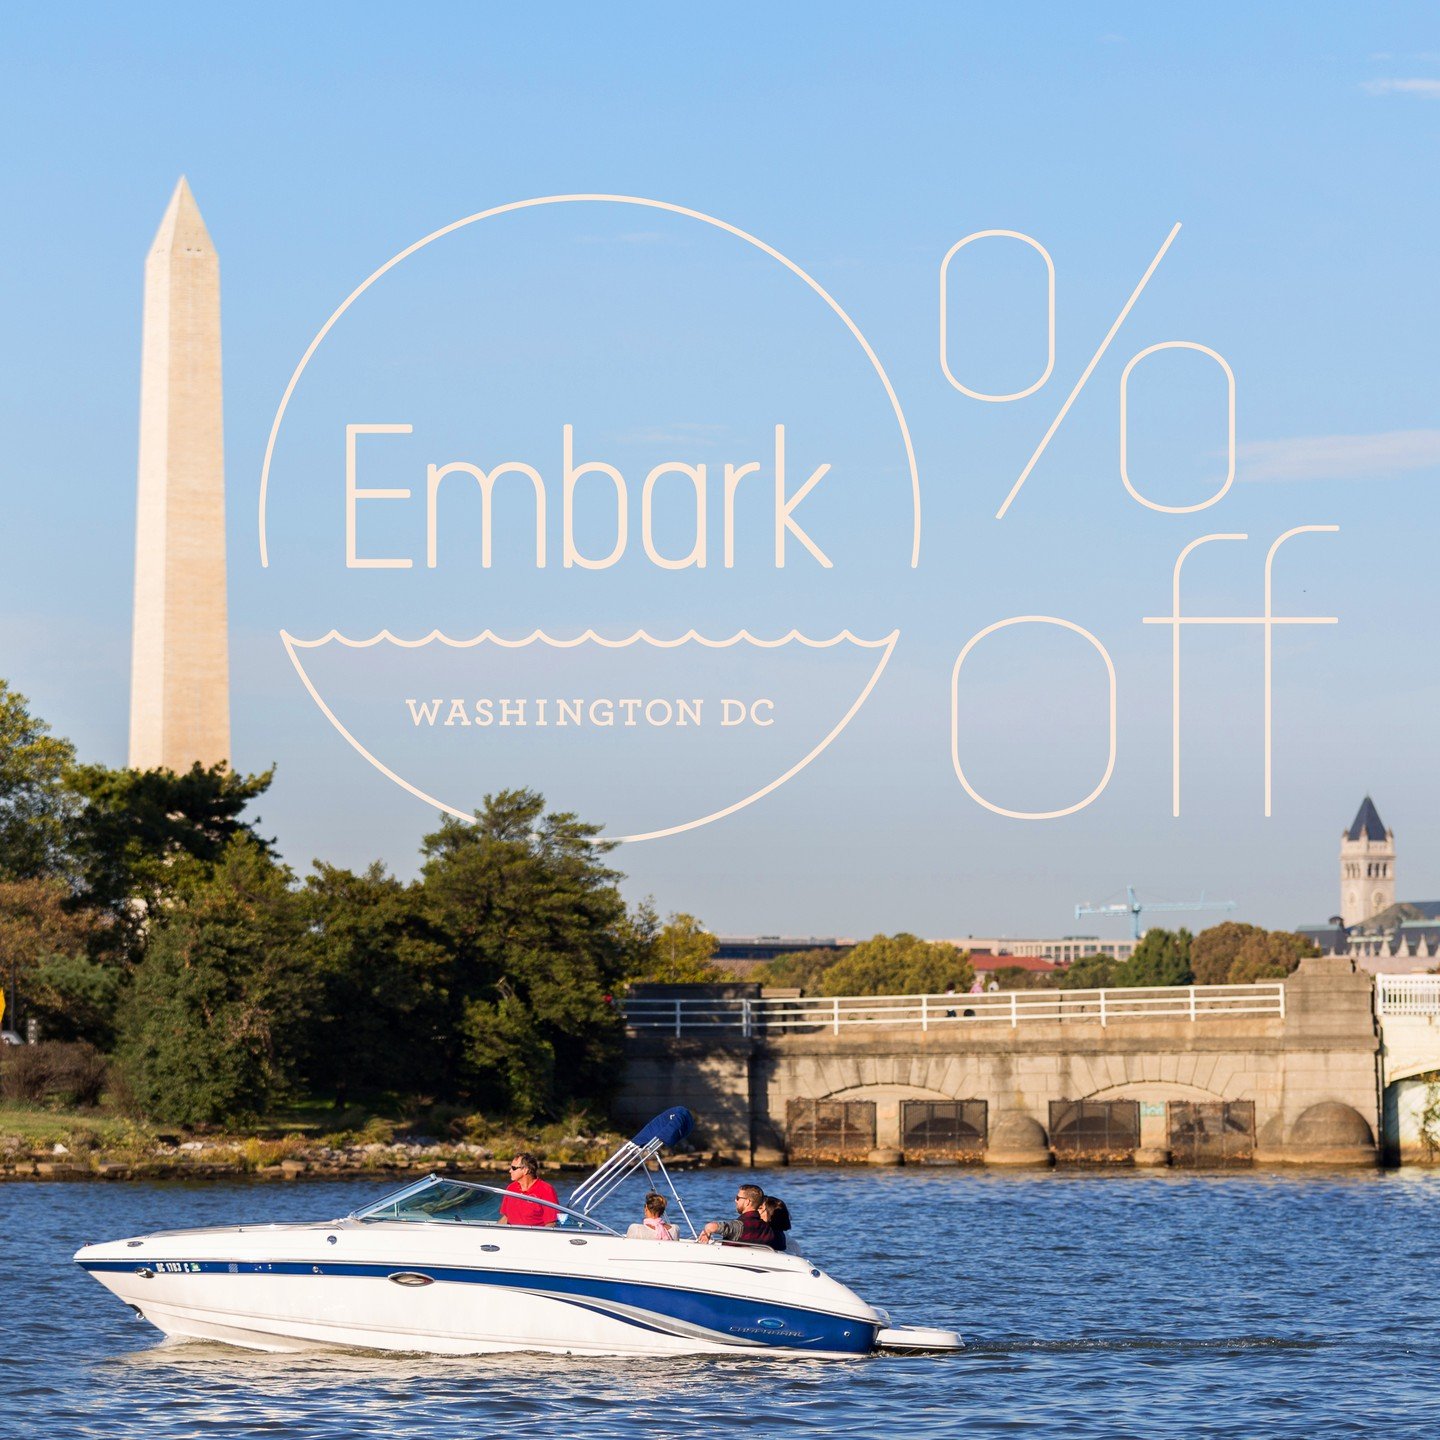 Enjoy a 10% &ldquo;Tax Break&rdquo; from Embark DC, starting April 15... through the end of the month!

We know how stressful tax season can be. What better way to let the angst flow away than a relaxing and private boat cruise? (Invite your accounta